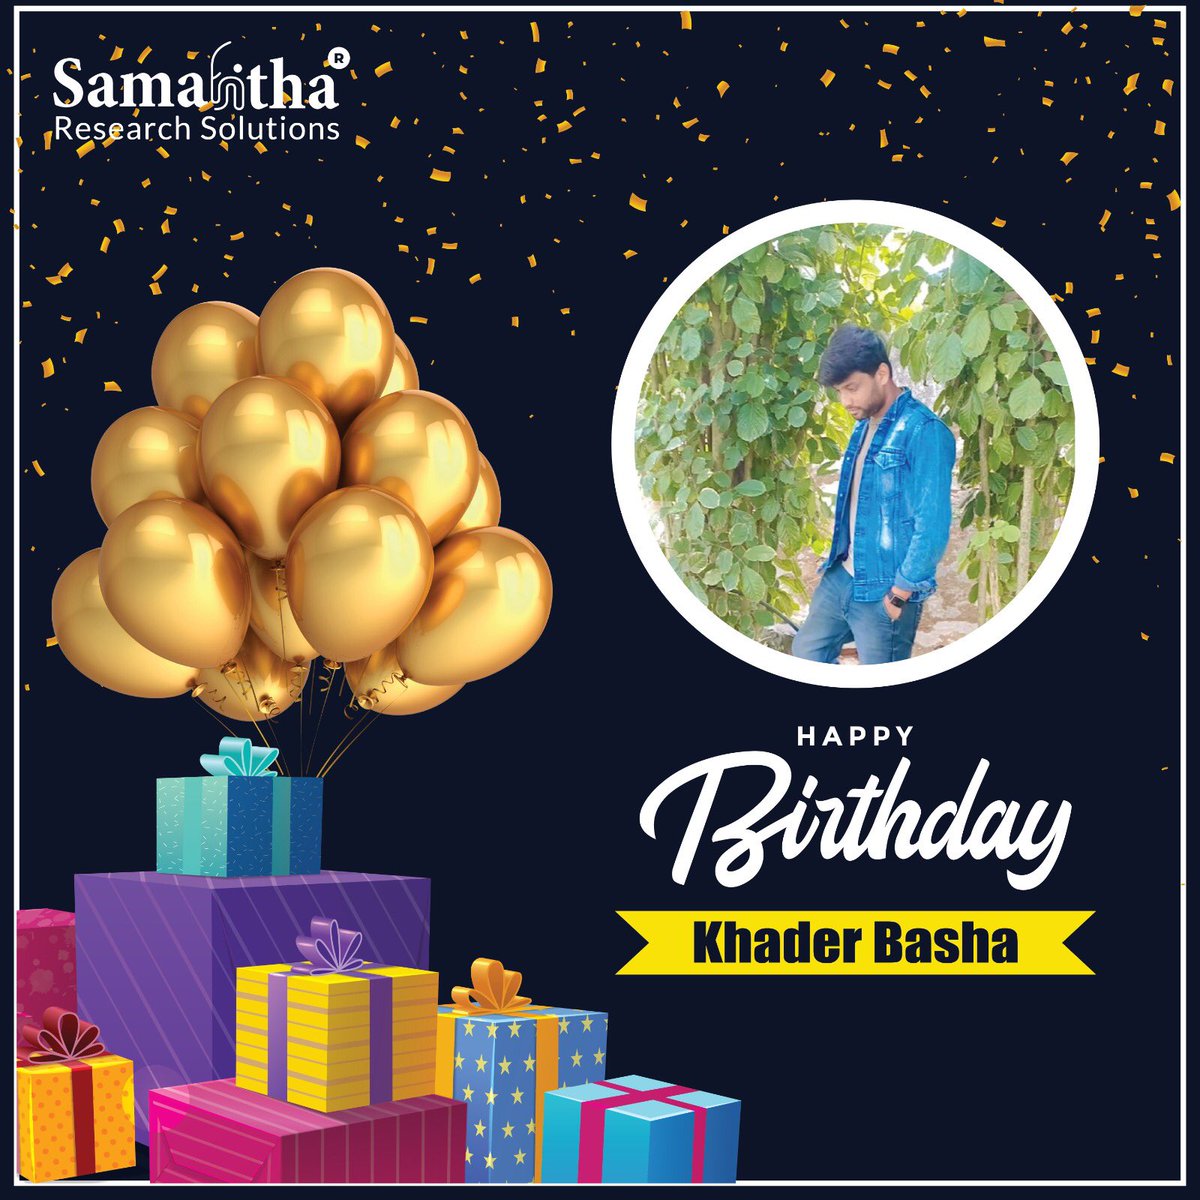 Heartfelt wishes to Mr.Khader Basha on his birthday!
Team Samahitha wishes you happiness and prosperity on this occasion and in the years to come.
#birthdaywishes #ourteam #ourstrength #heartfeltwishes #samahitharesearchsolutions #clinicalresearch #clinicaltrails